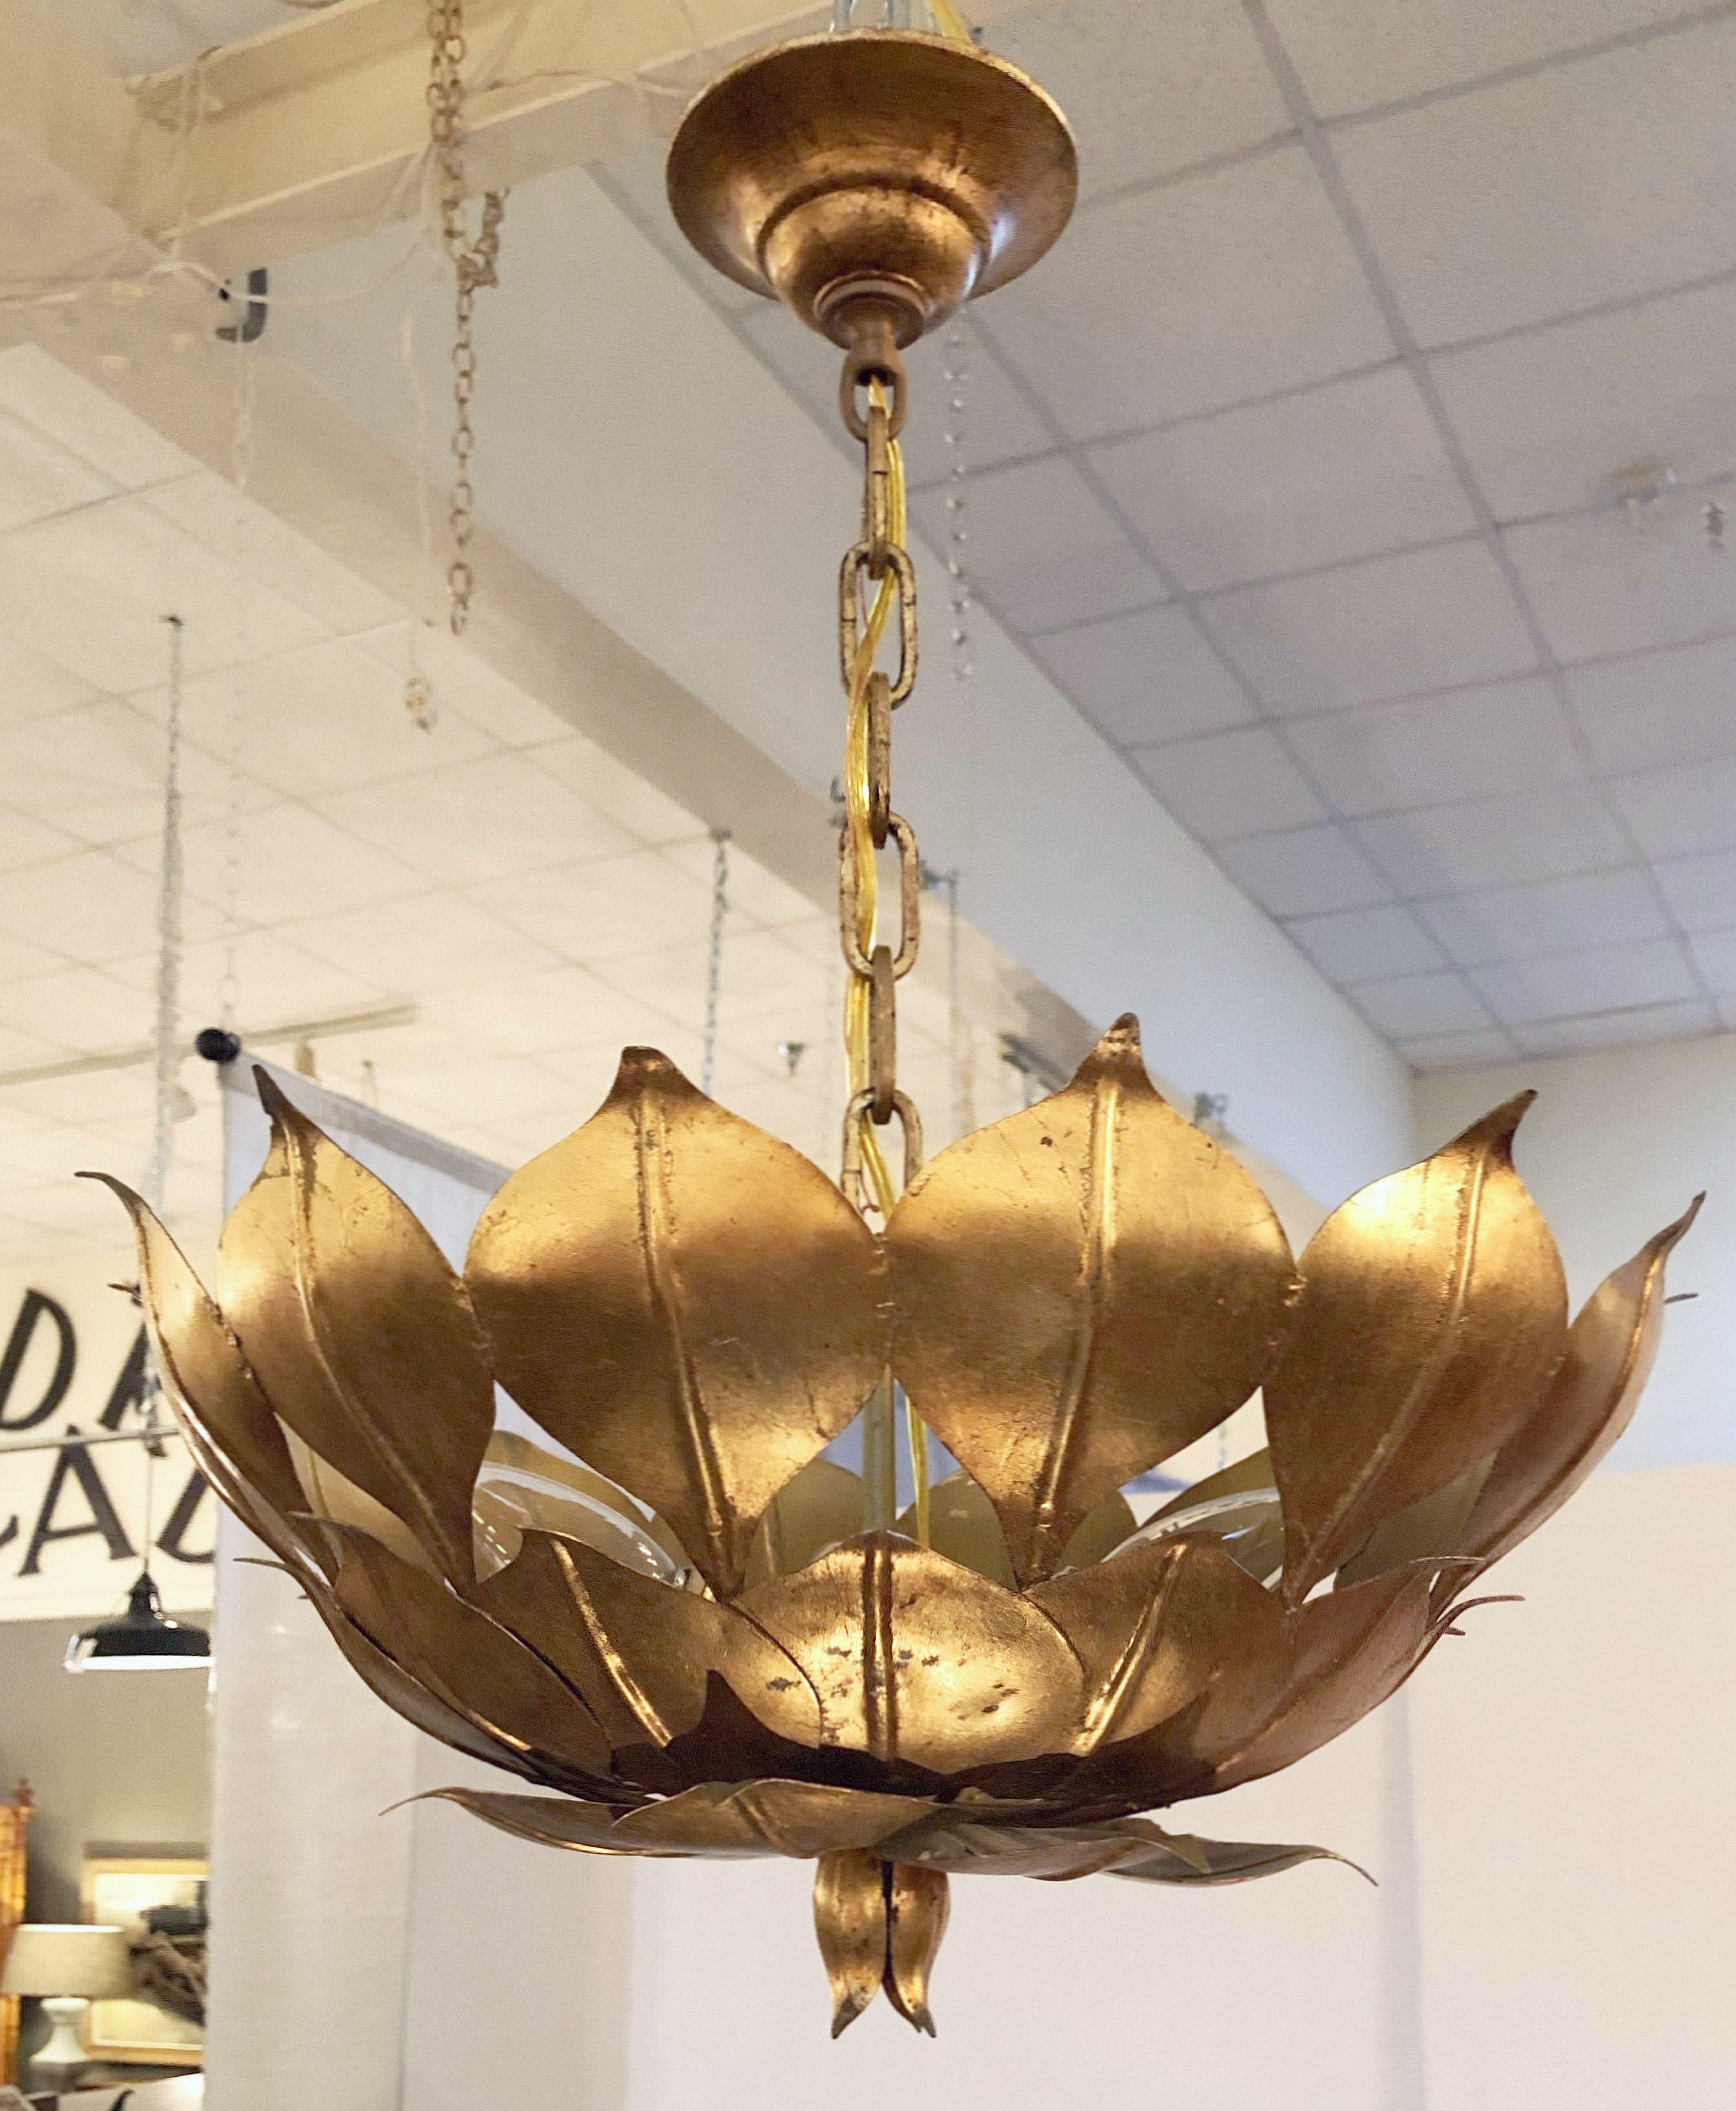 French Gilt Three-Light Hanging Fixture with Lotus or Leaf Design (18